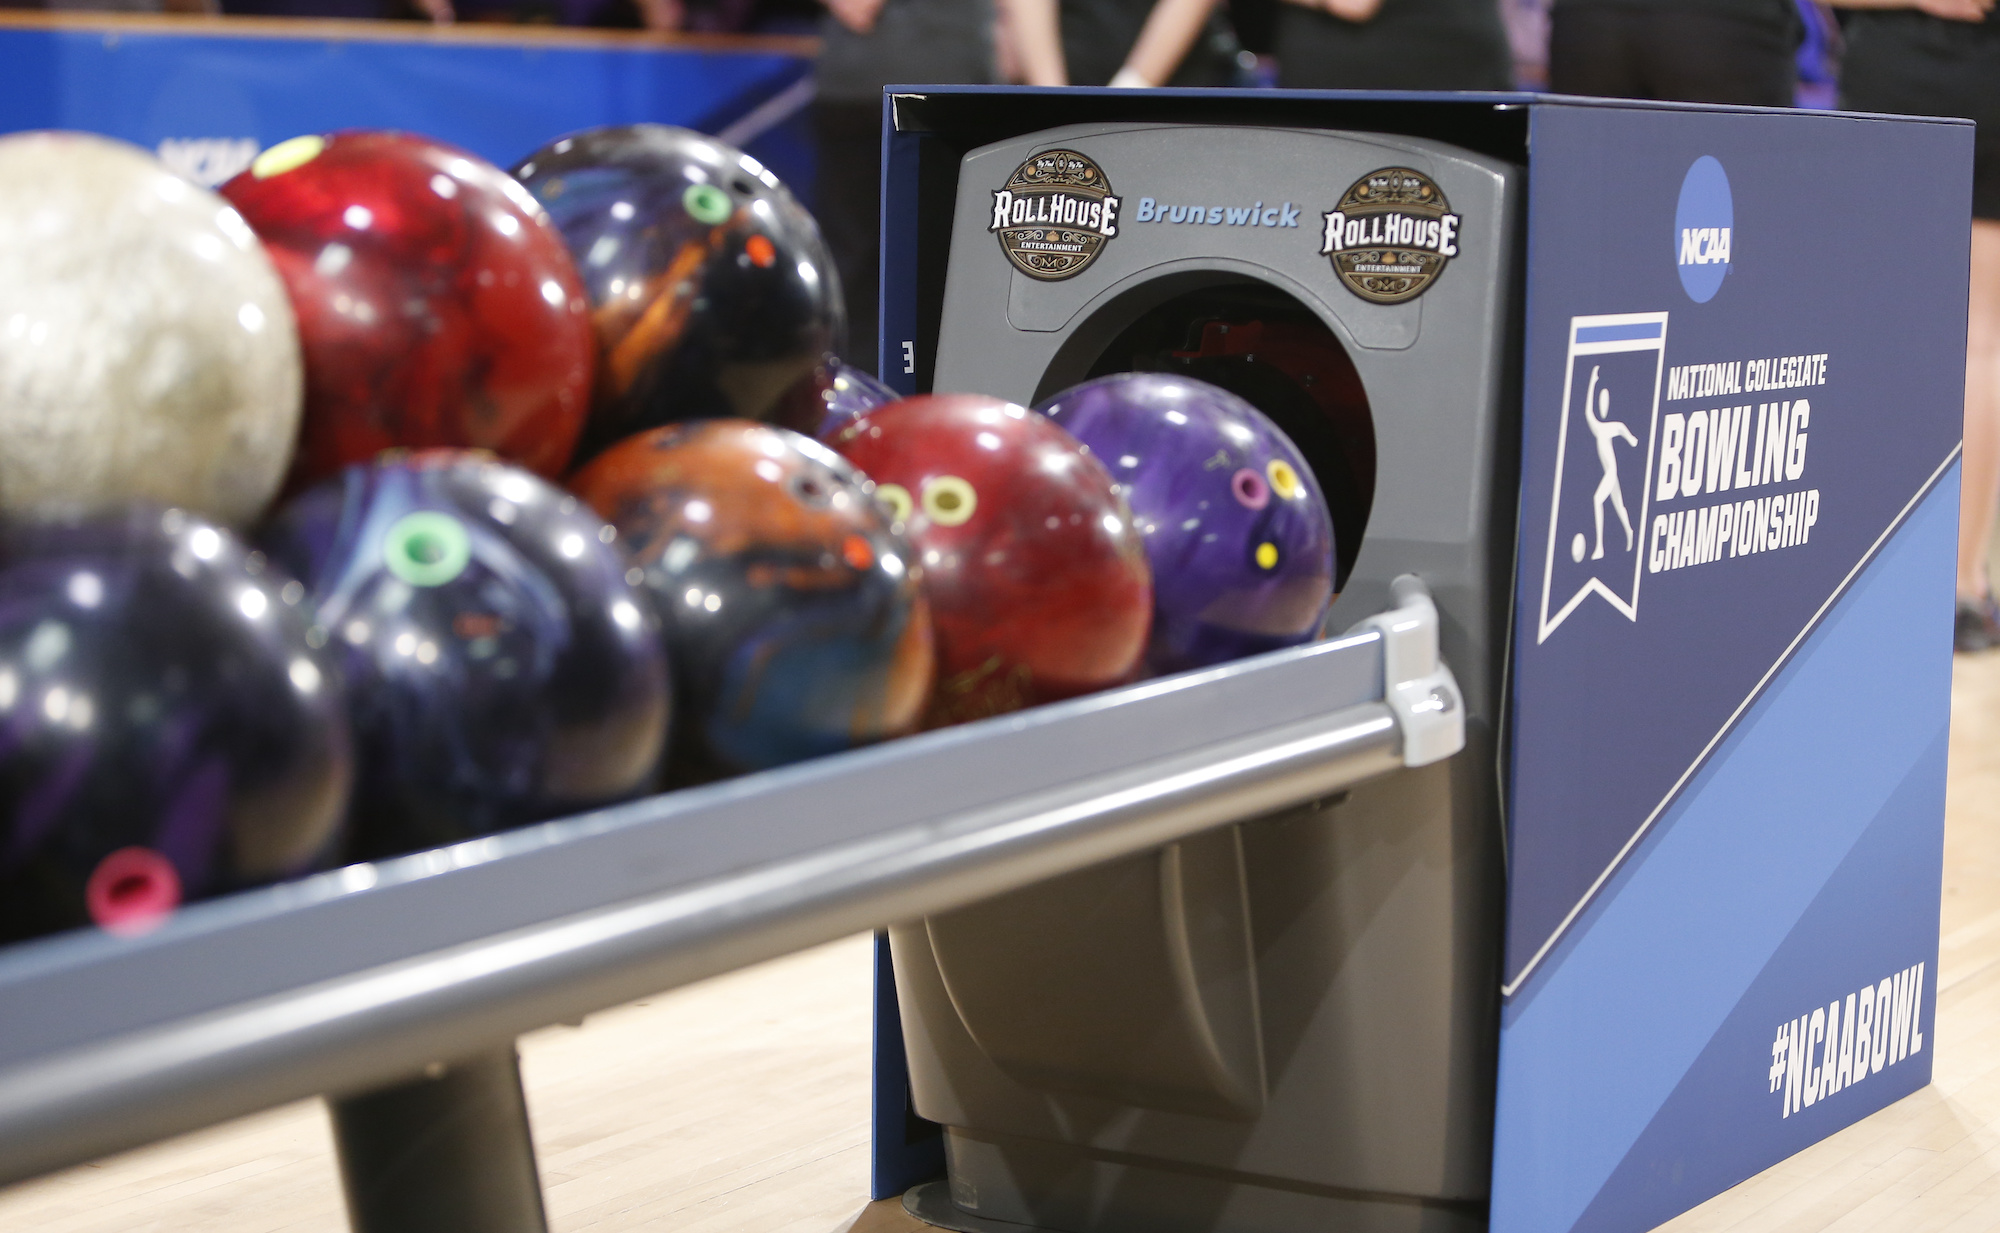 WICKLIFFE, OH - APRIL 13: The Stephen F. Austin Ladyjacks take on the Vanderbilt Commodores during the Division I Women's Bowling Championship held at Rollhouse Wickliffe on April 13, 2019 in Wickliffe, Ohio. (Photo by Jay LaPrete/NCAA Photos via Getty Images)